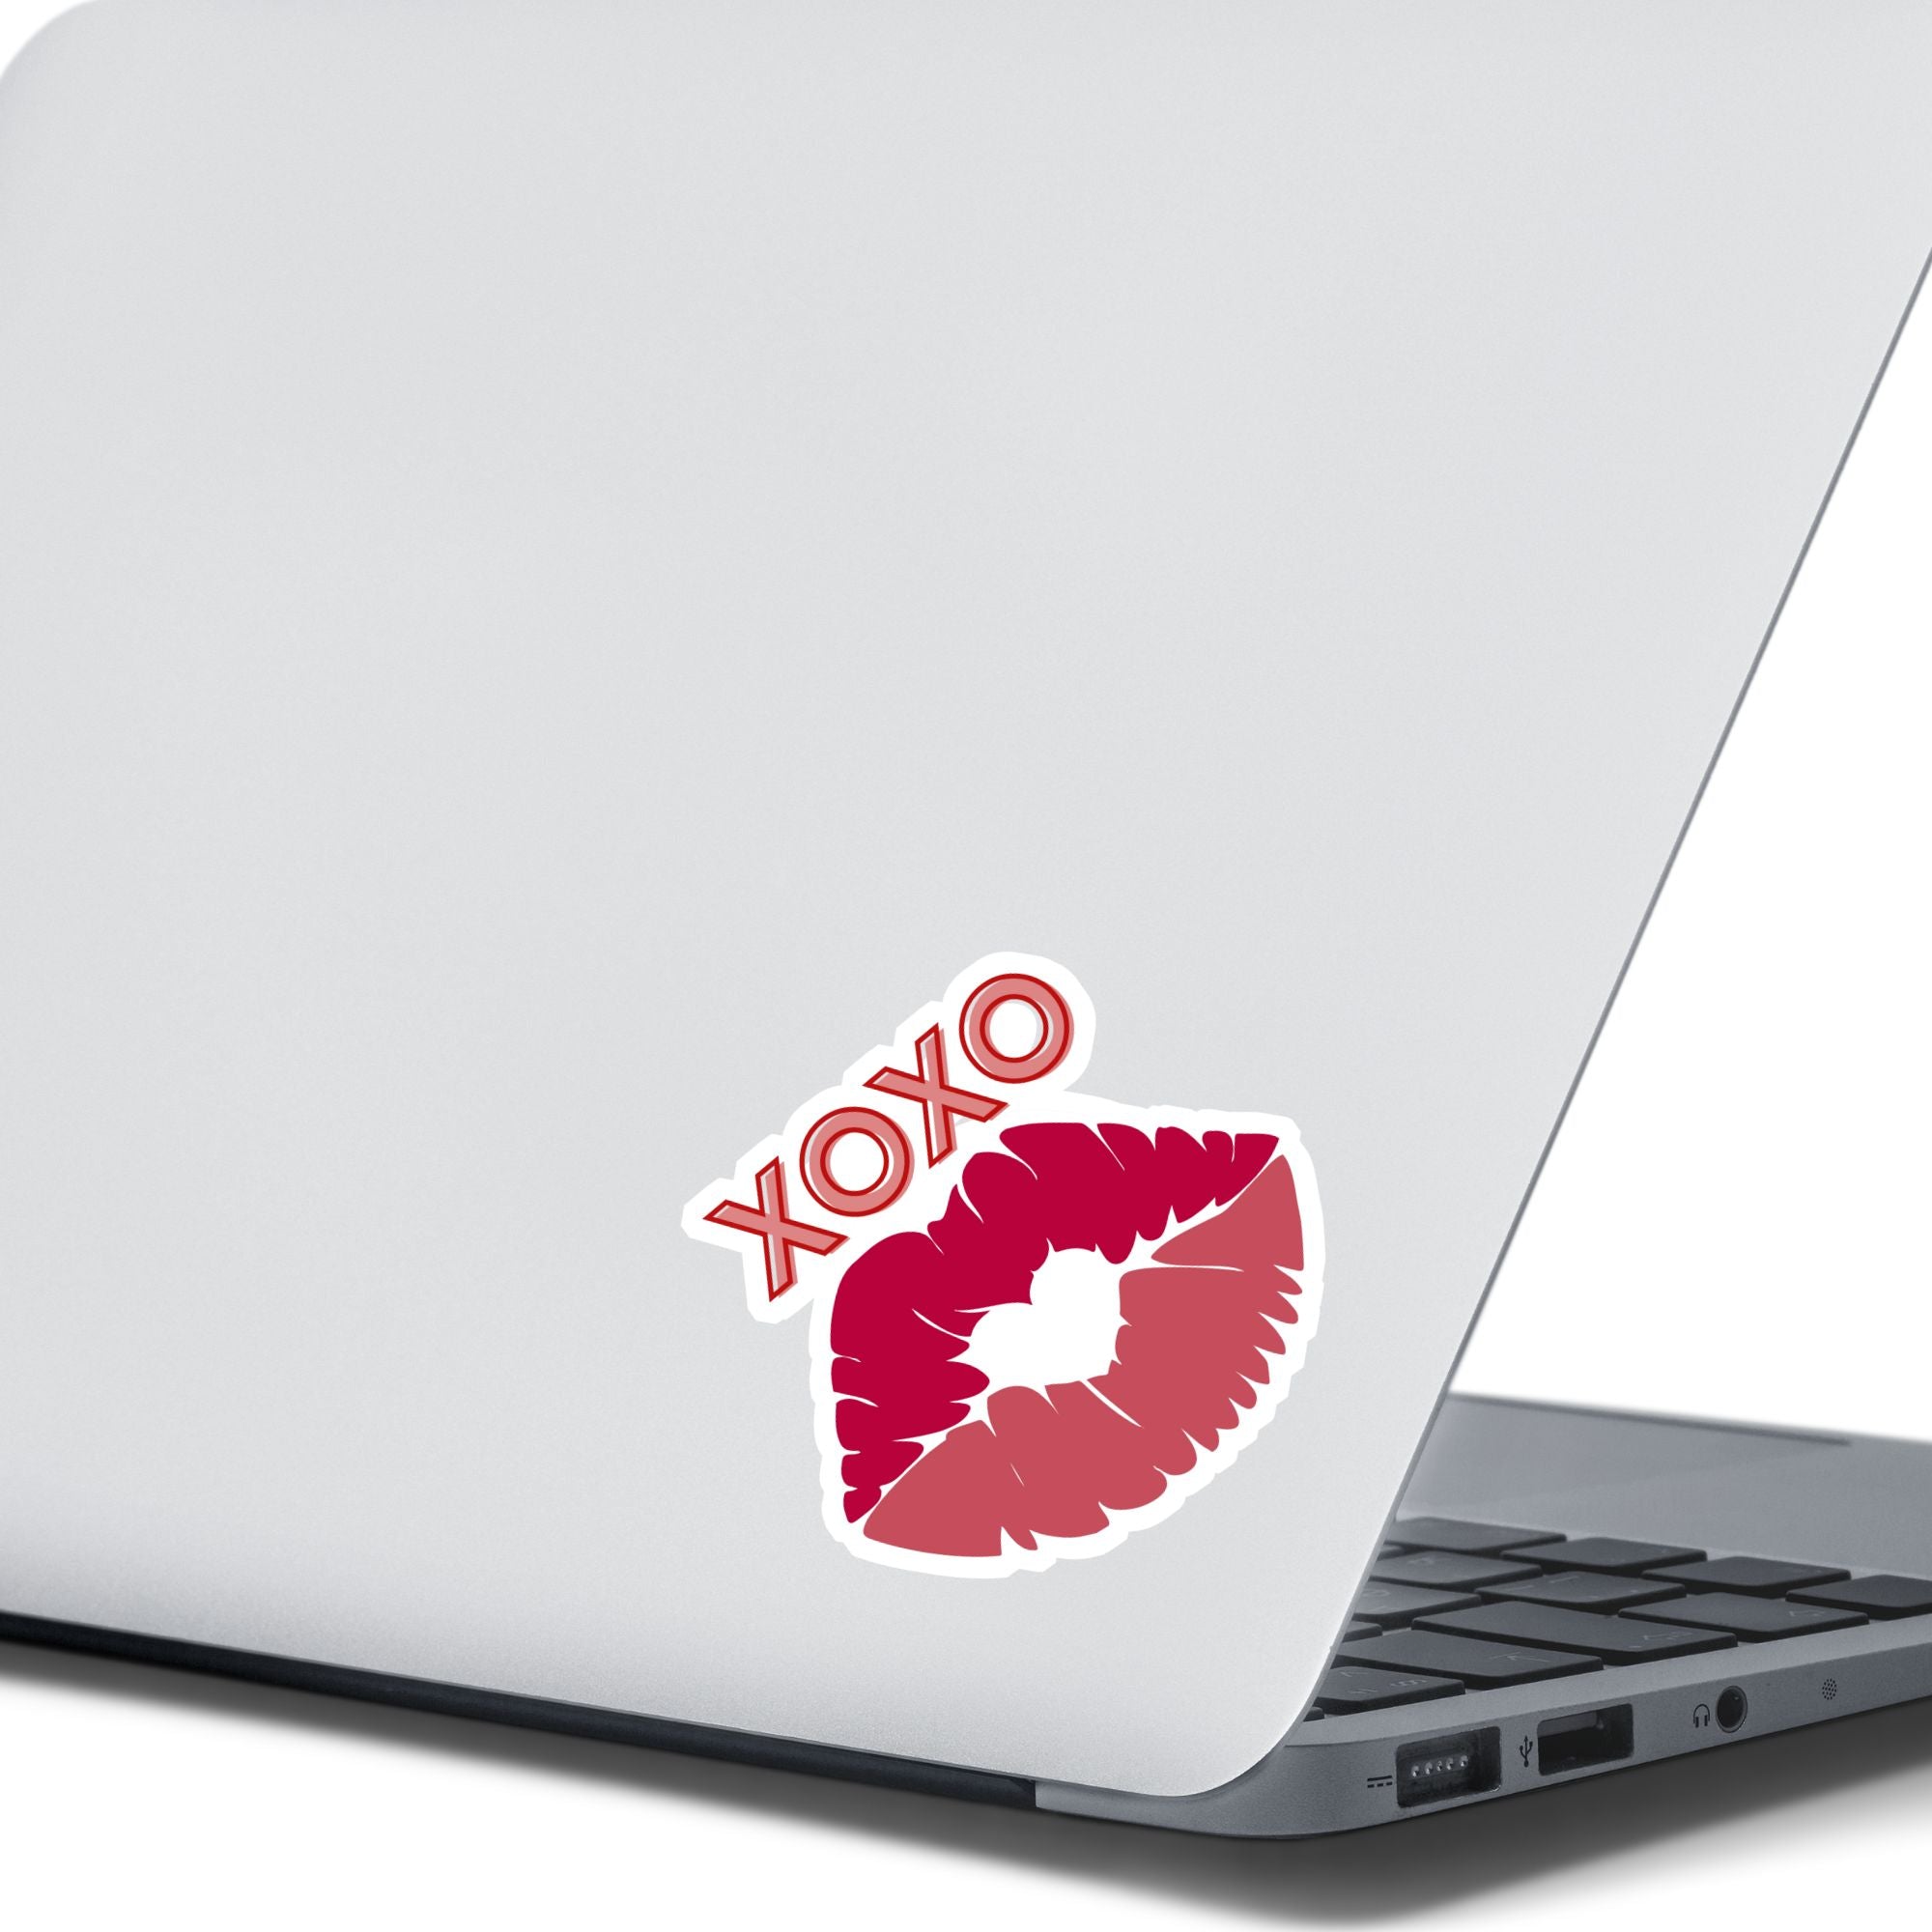 This individual die-cut sticker pretty much speaks for itself! It features a pair of lips with XOXO written above. Nuff said!  This image shows the XOXO die-cut sticker on the back of an open laptop.